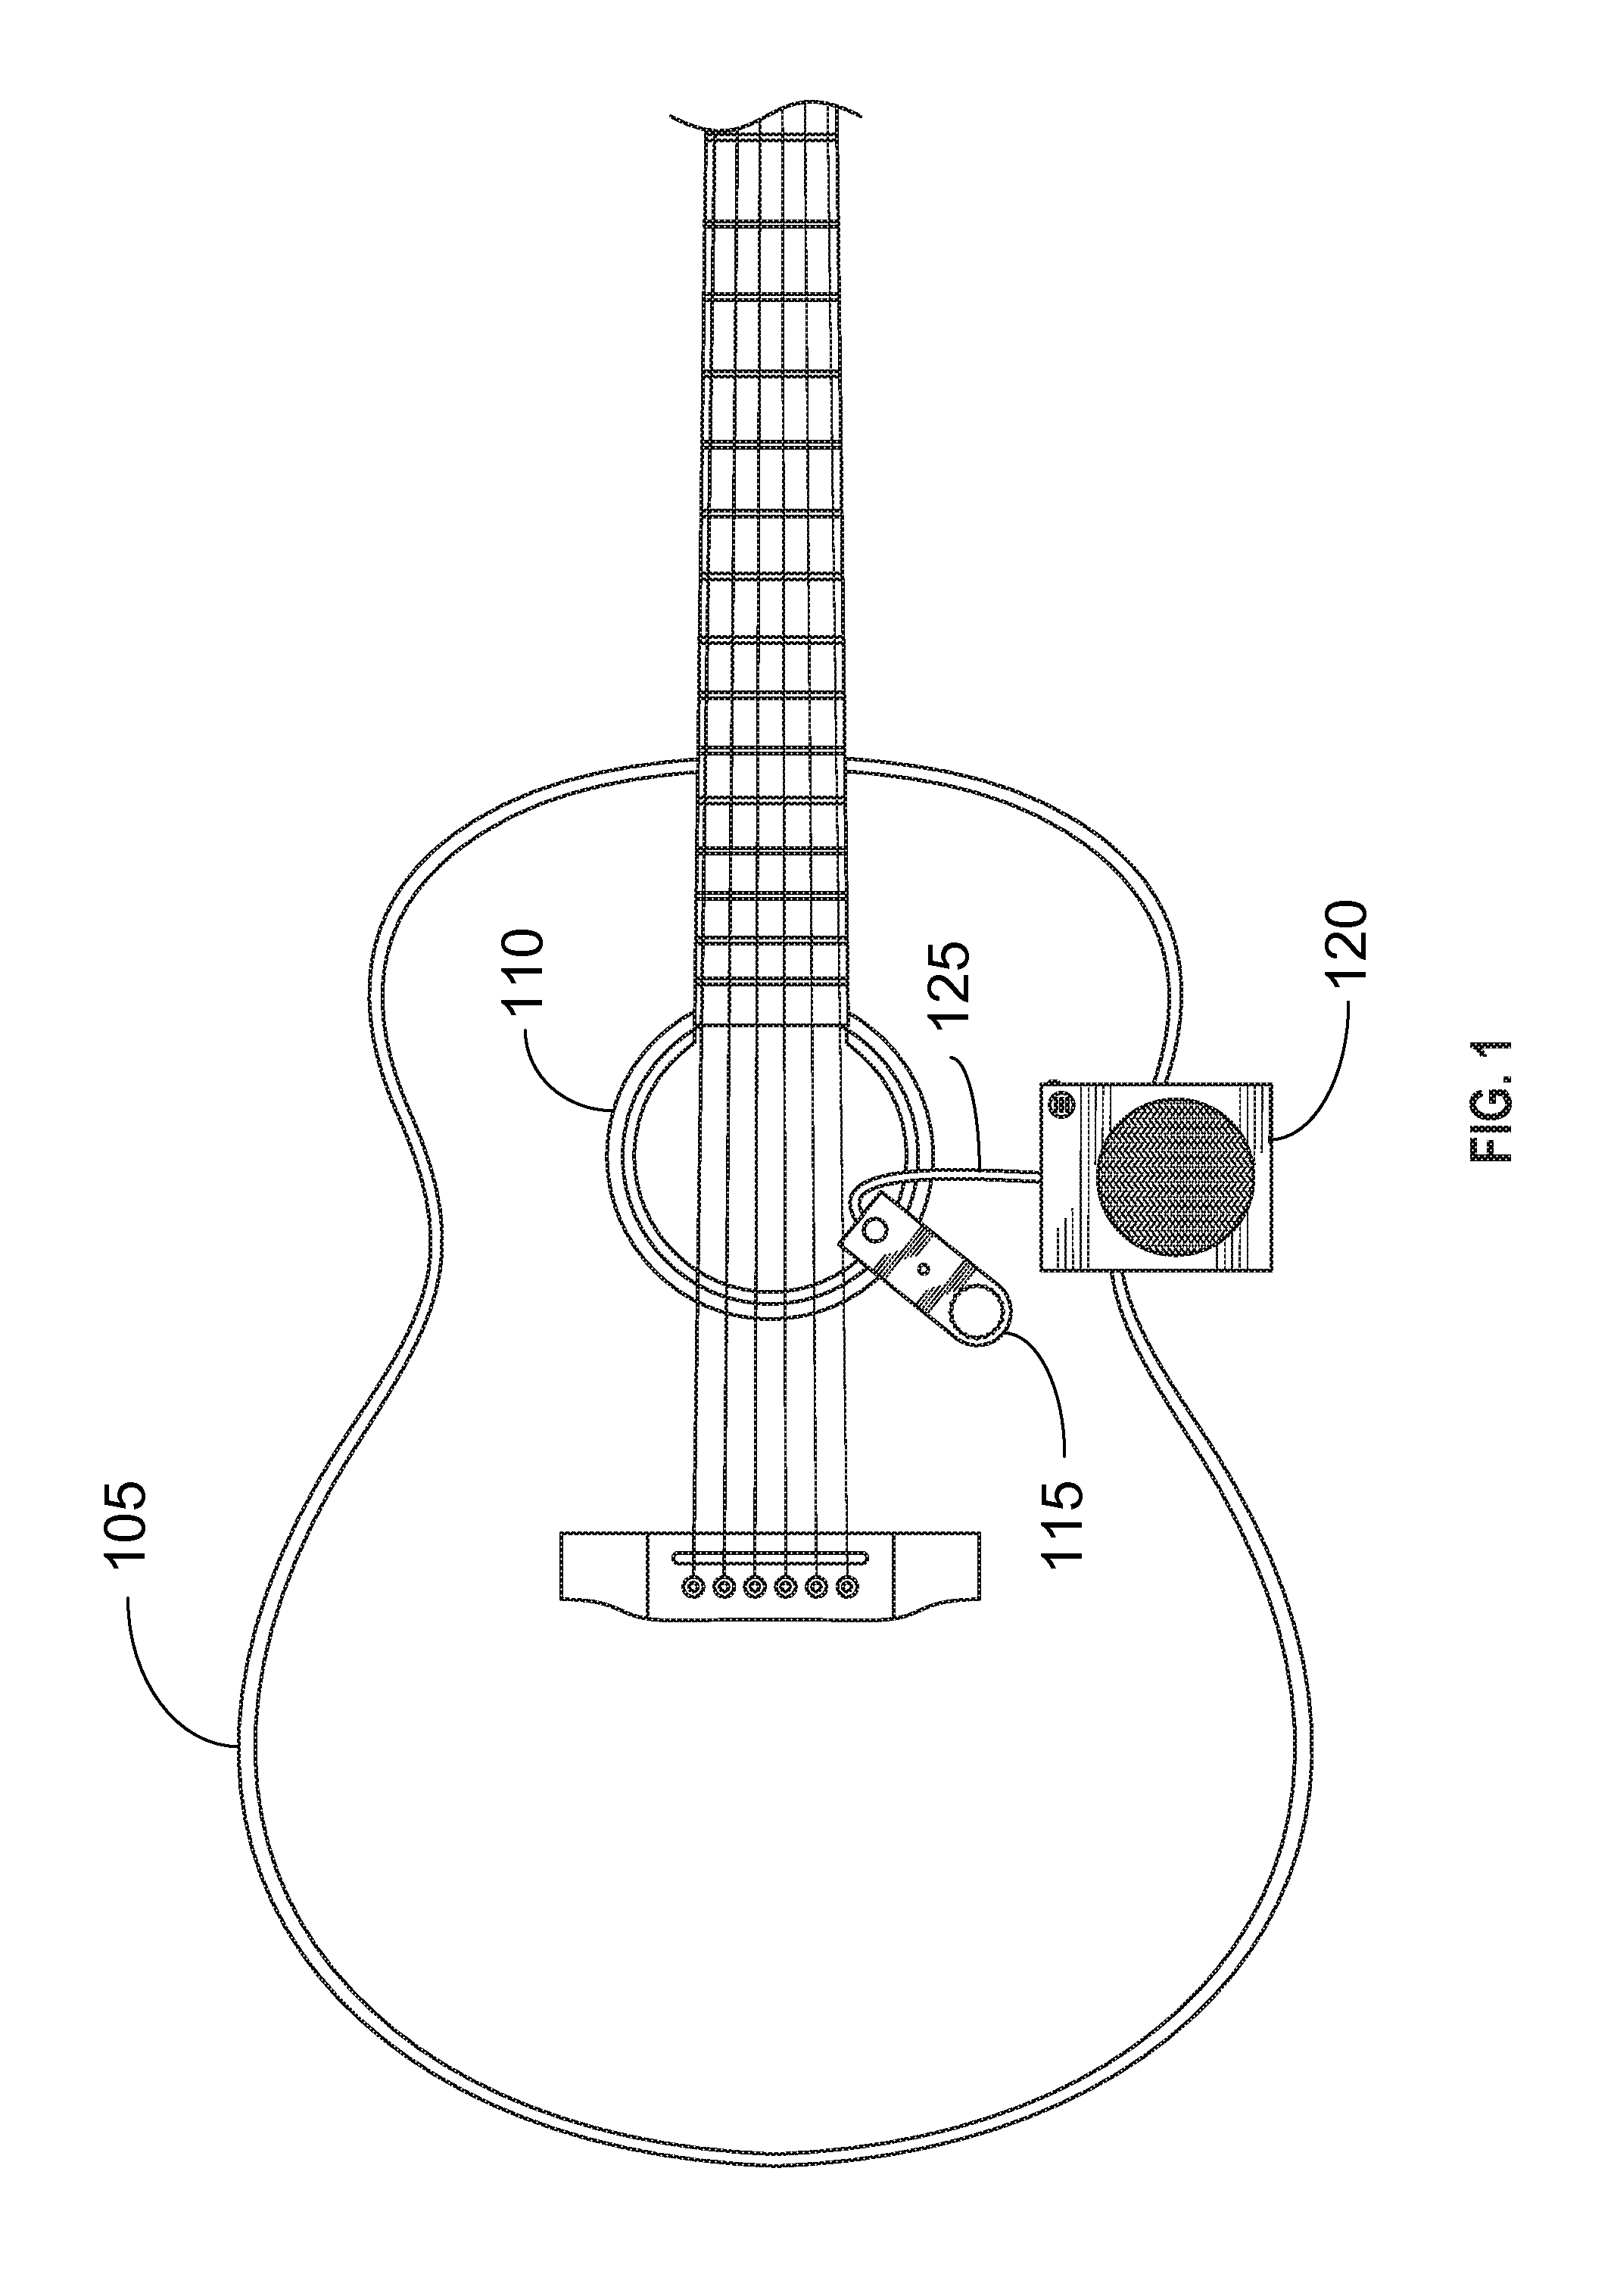 Portable Recording, Looping, and Playback System for Acoustic Instruments